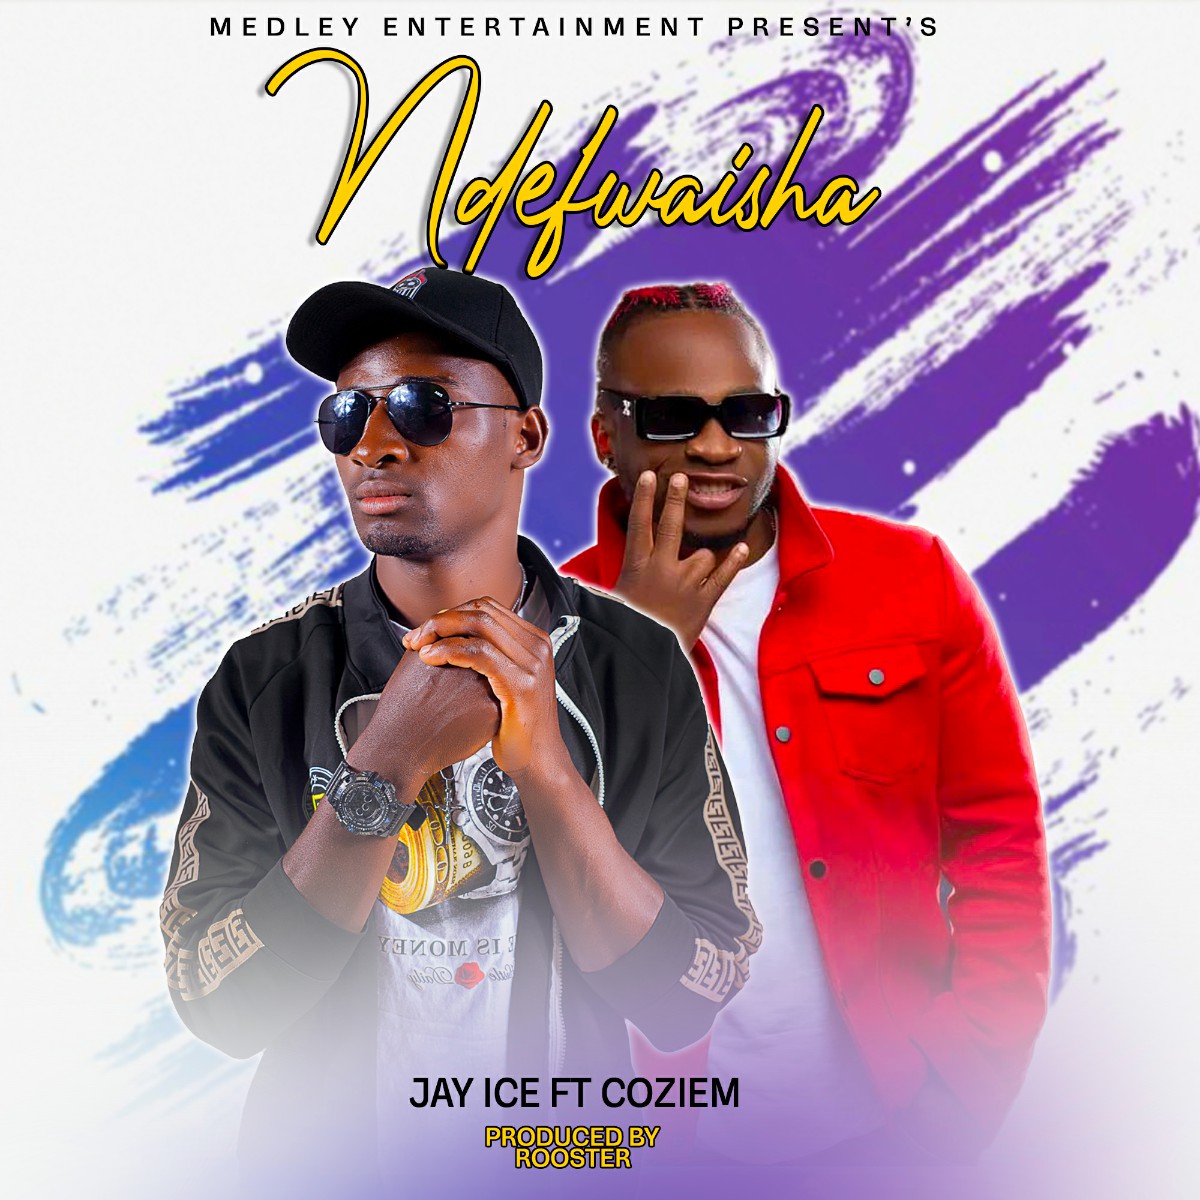 Jay Ice ft. Coziem - Ndefwaisha (Prod. Rooster)